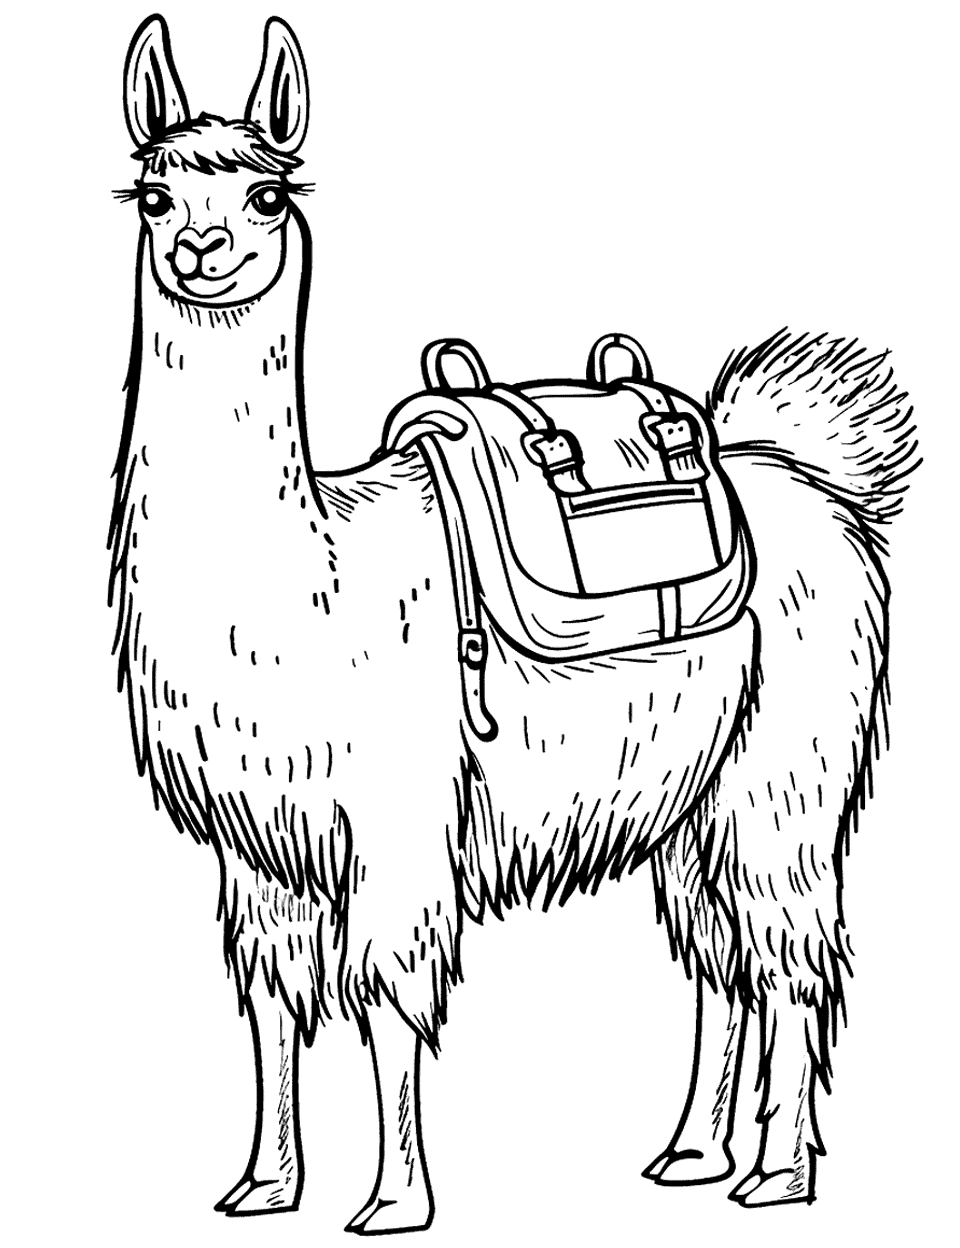 Llama with a Backpack Coloring Page - A llama prepared for an adventure with a backpack.